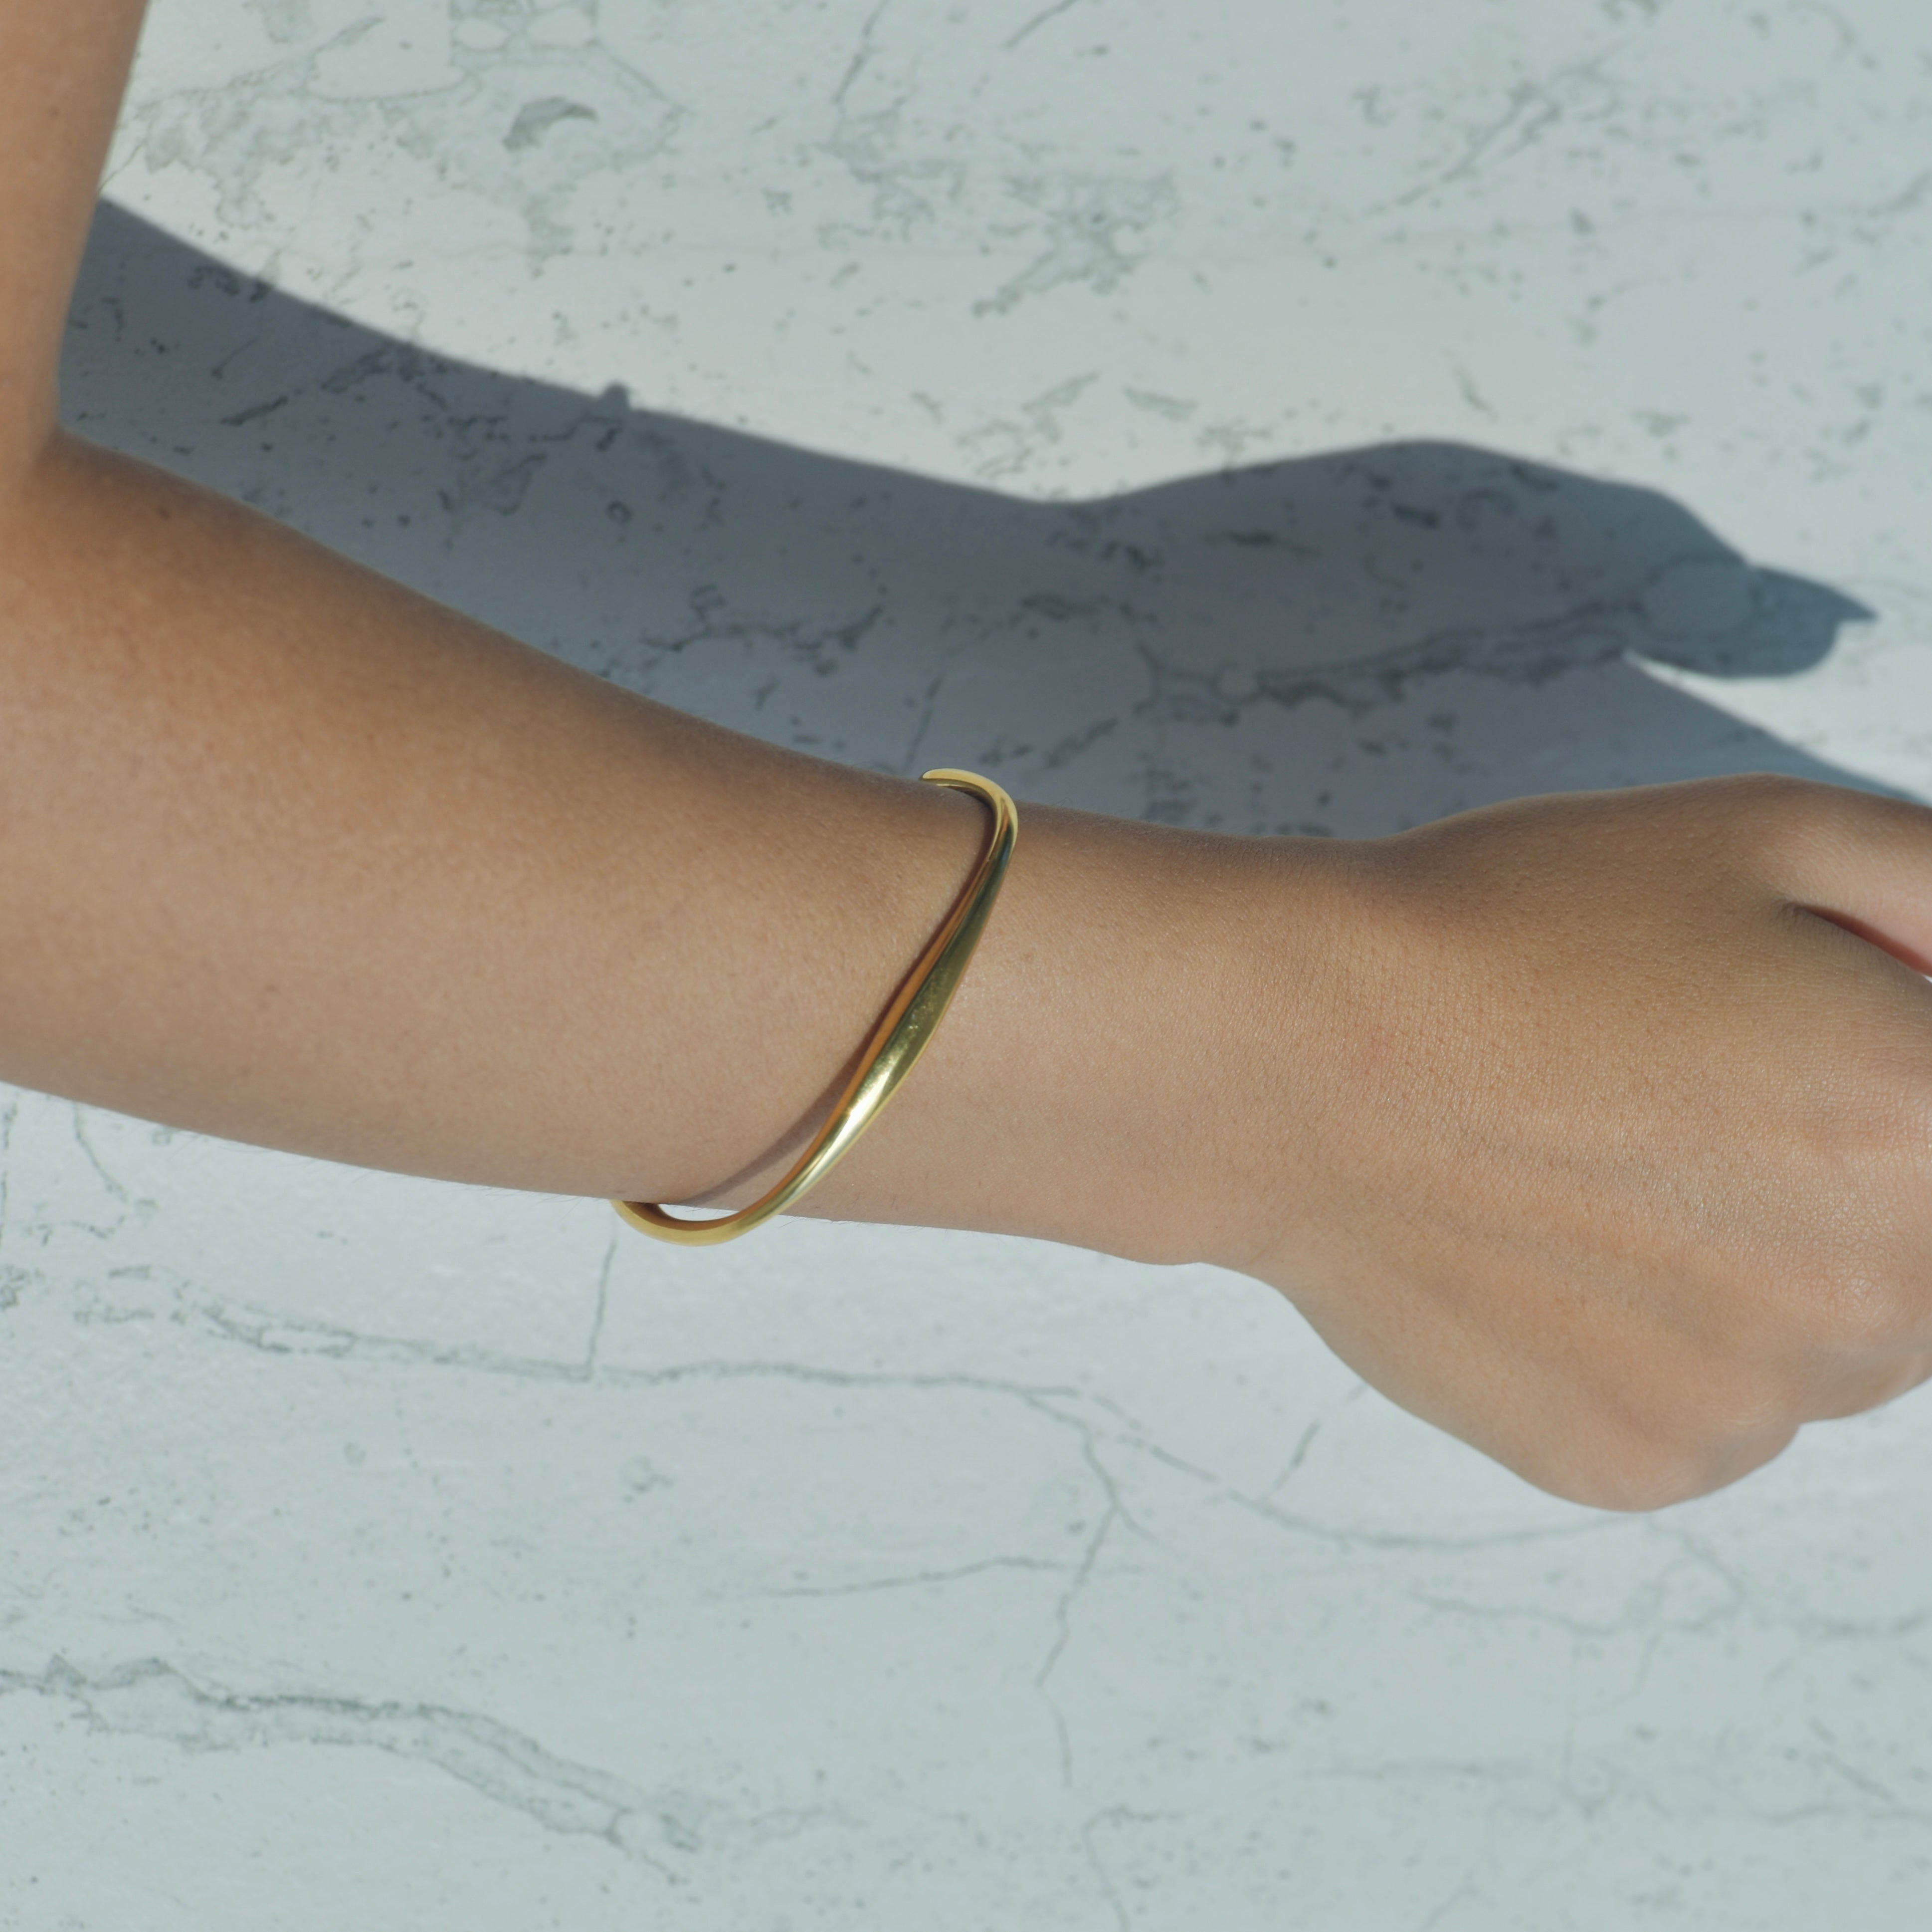 RAY Gold Cuff Bracelet. Cuff Gold metal bracelet with adjustable opening.